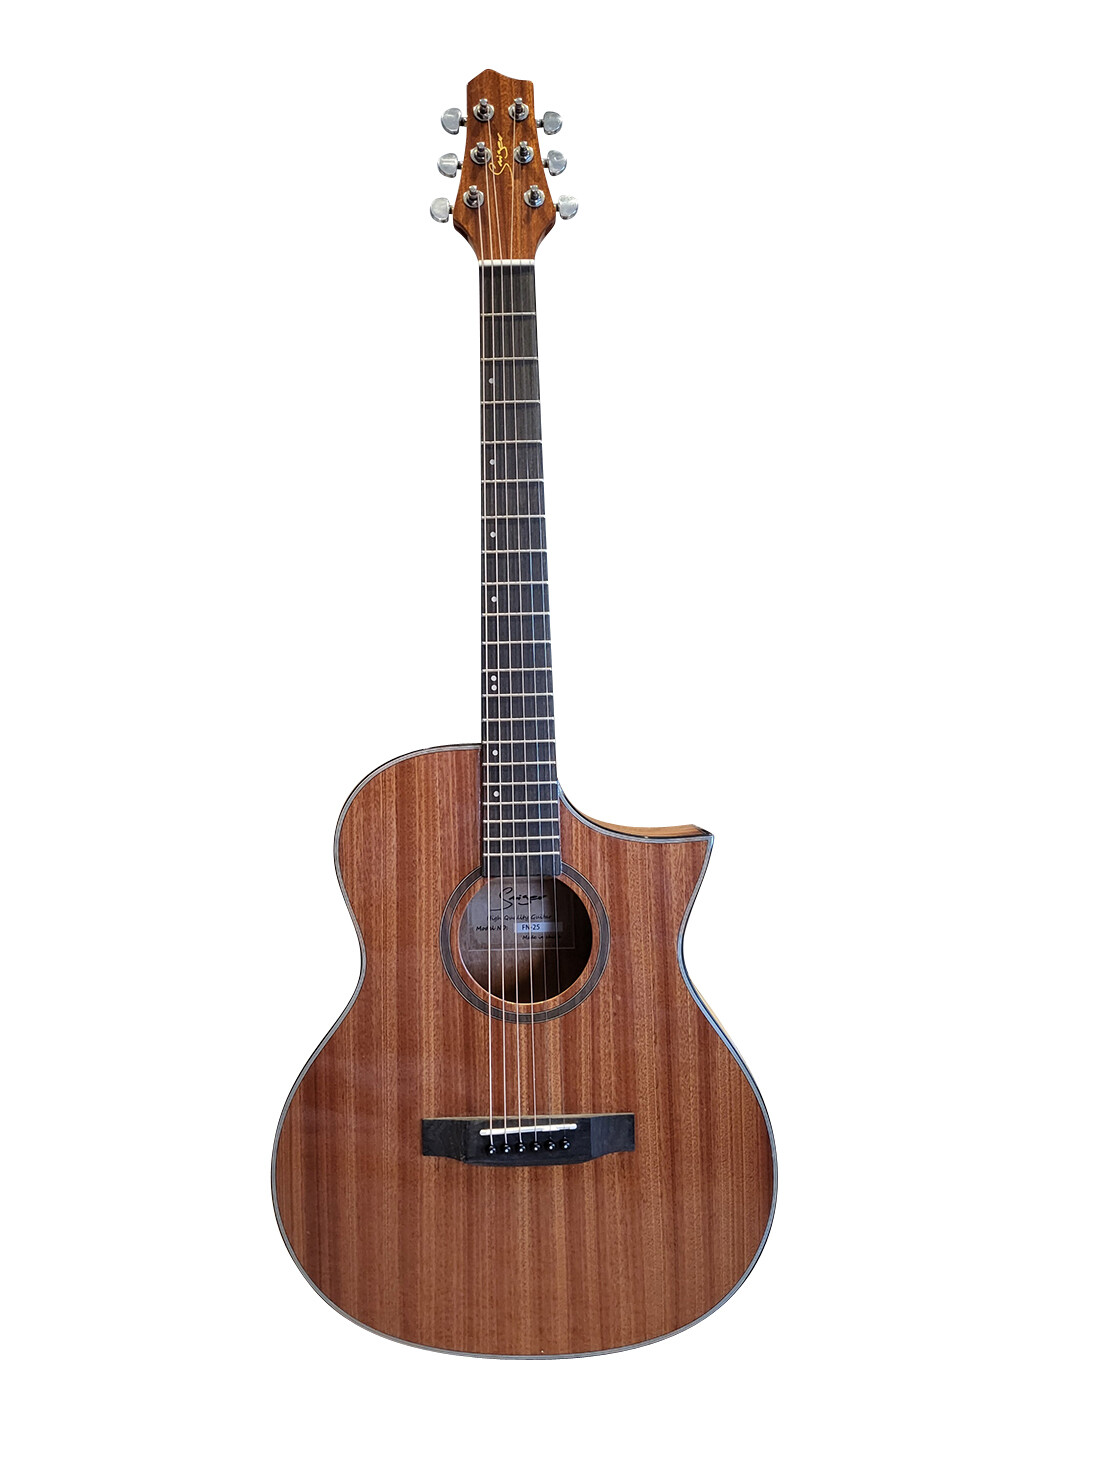 &quot;Discover Excellence with Our Top Grade A Spruce Acoustic Guitar - 40-inch Full-Size Cutaway Beauty in Brown High Gloss PPG763